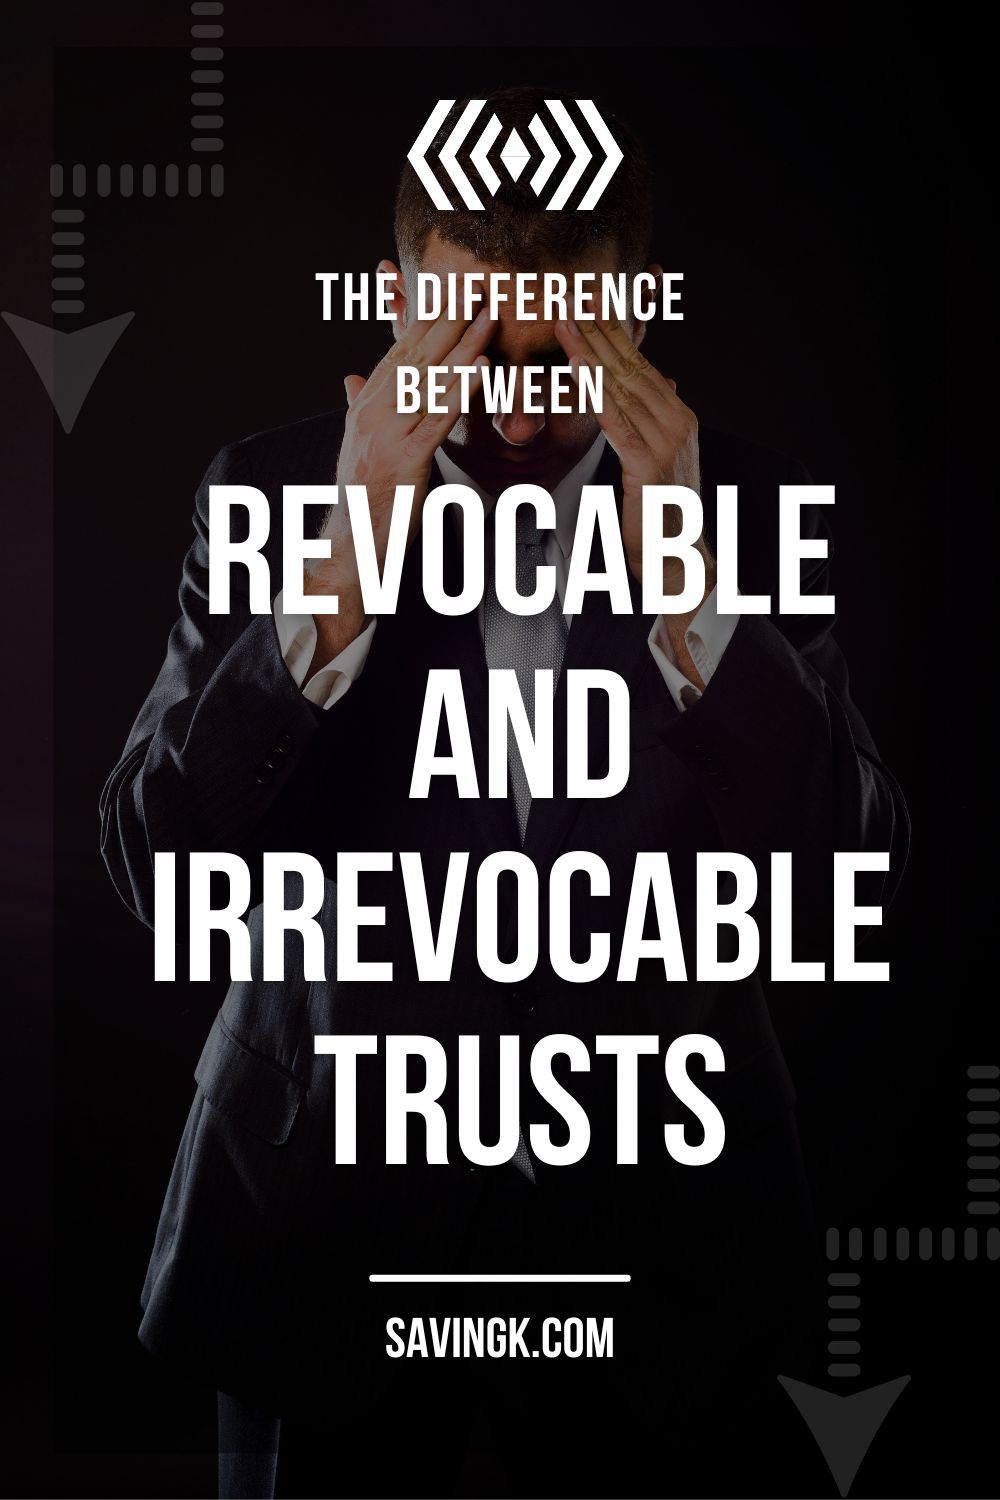 The Difference Between Revocable and Irrevocable Trusts